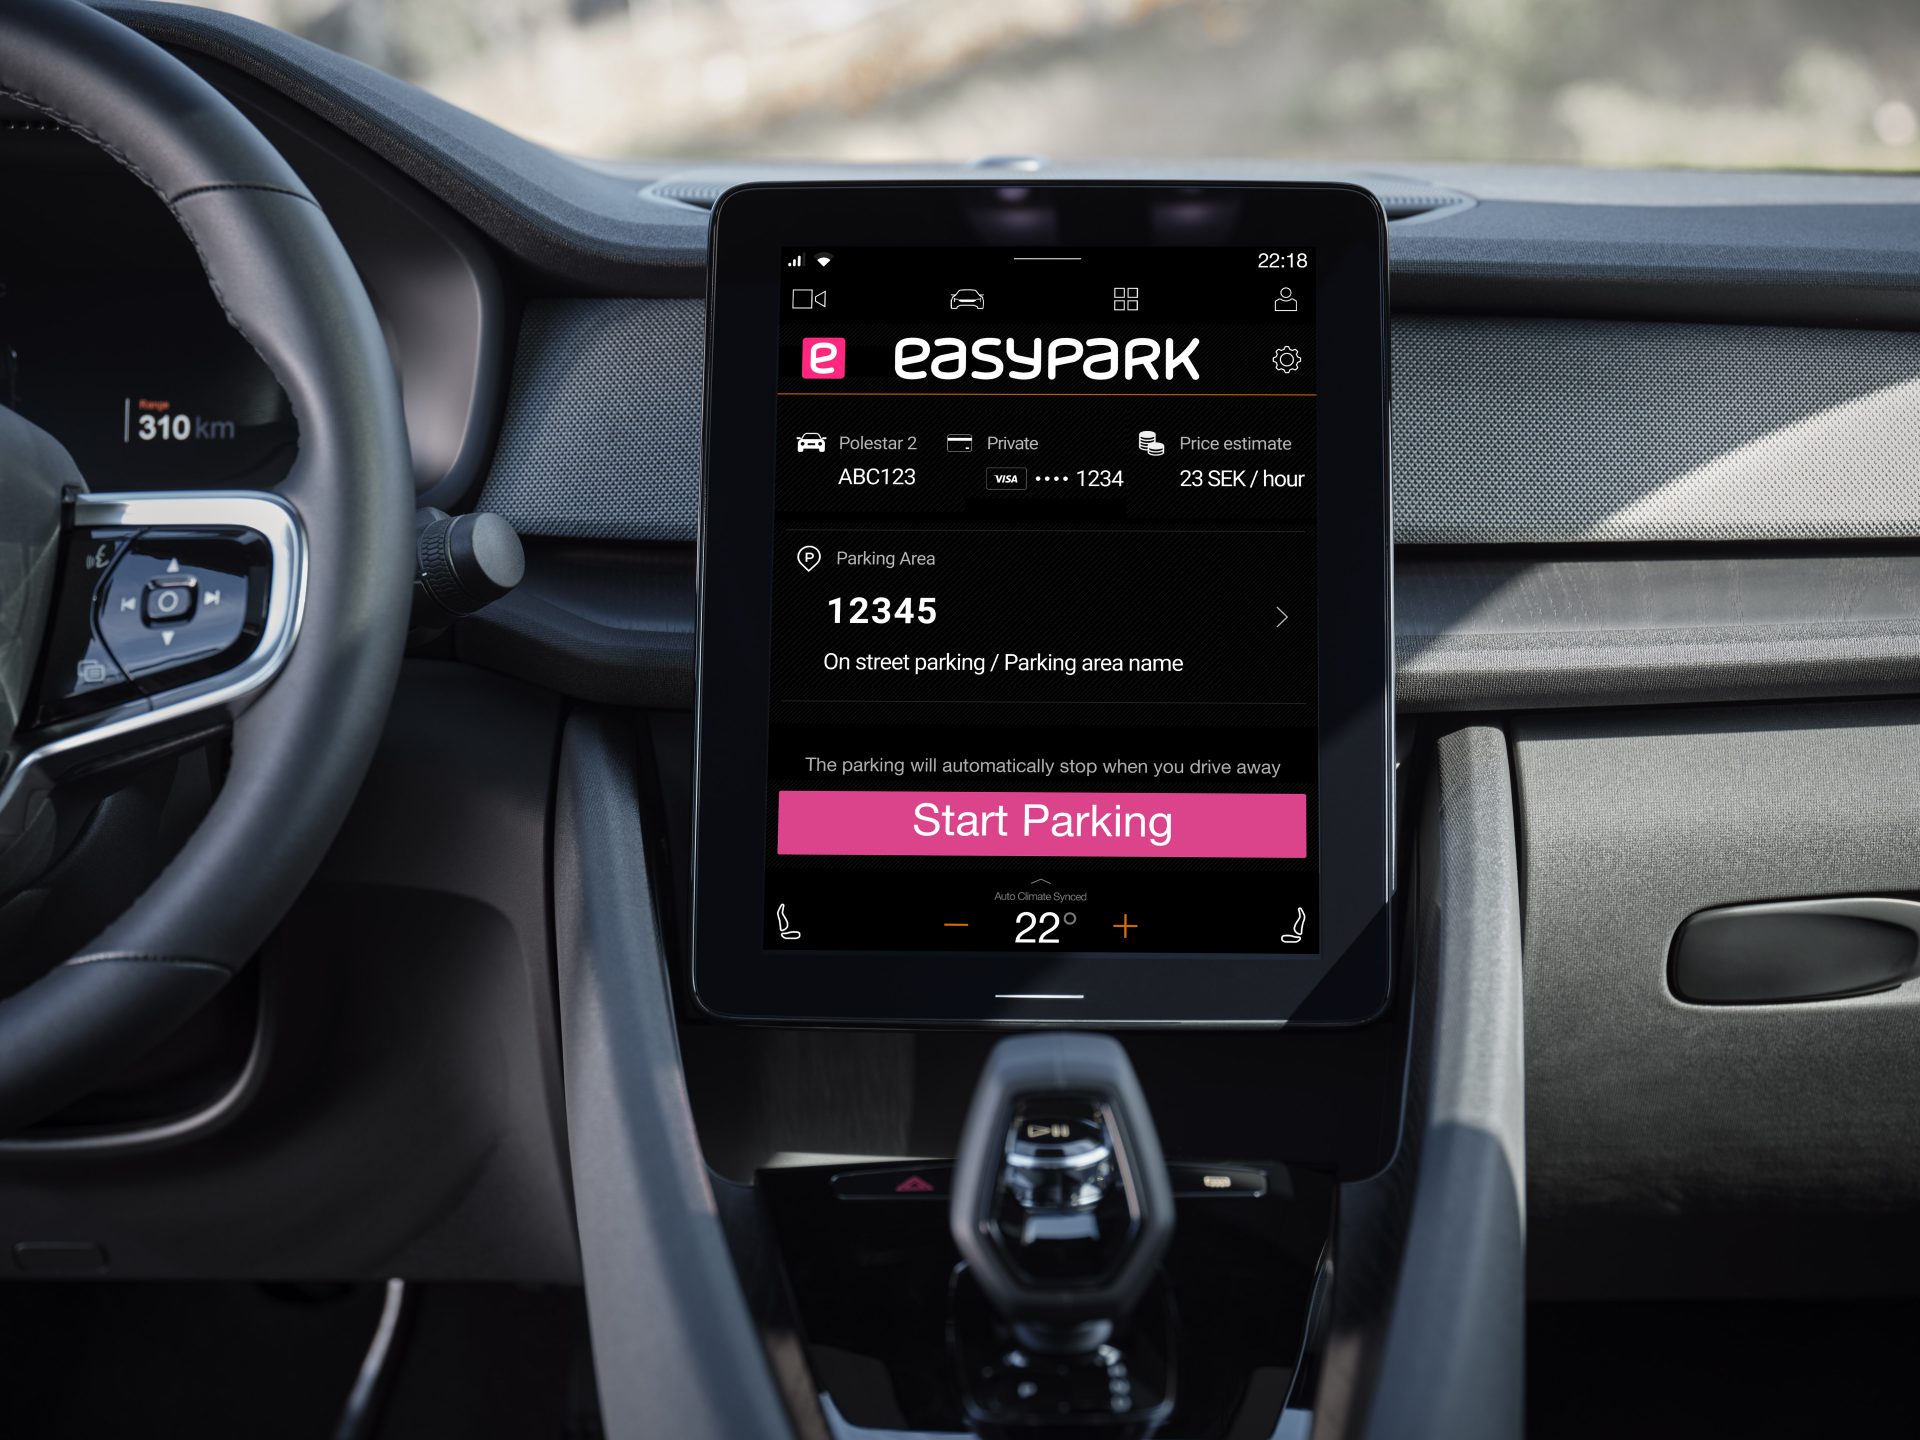 By integrating EasyPark’s app into Polestar’s Android Automotive environment the companies open up an entirely new range of possibilities to the driver.